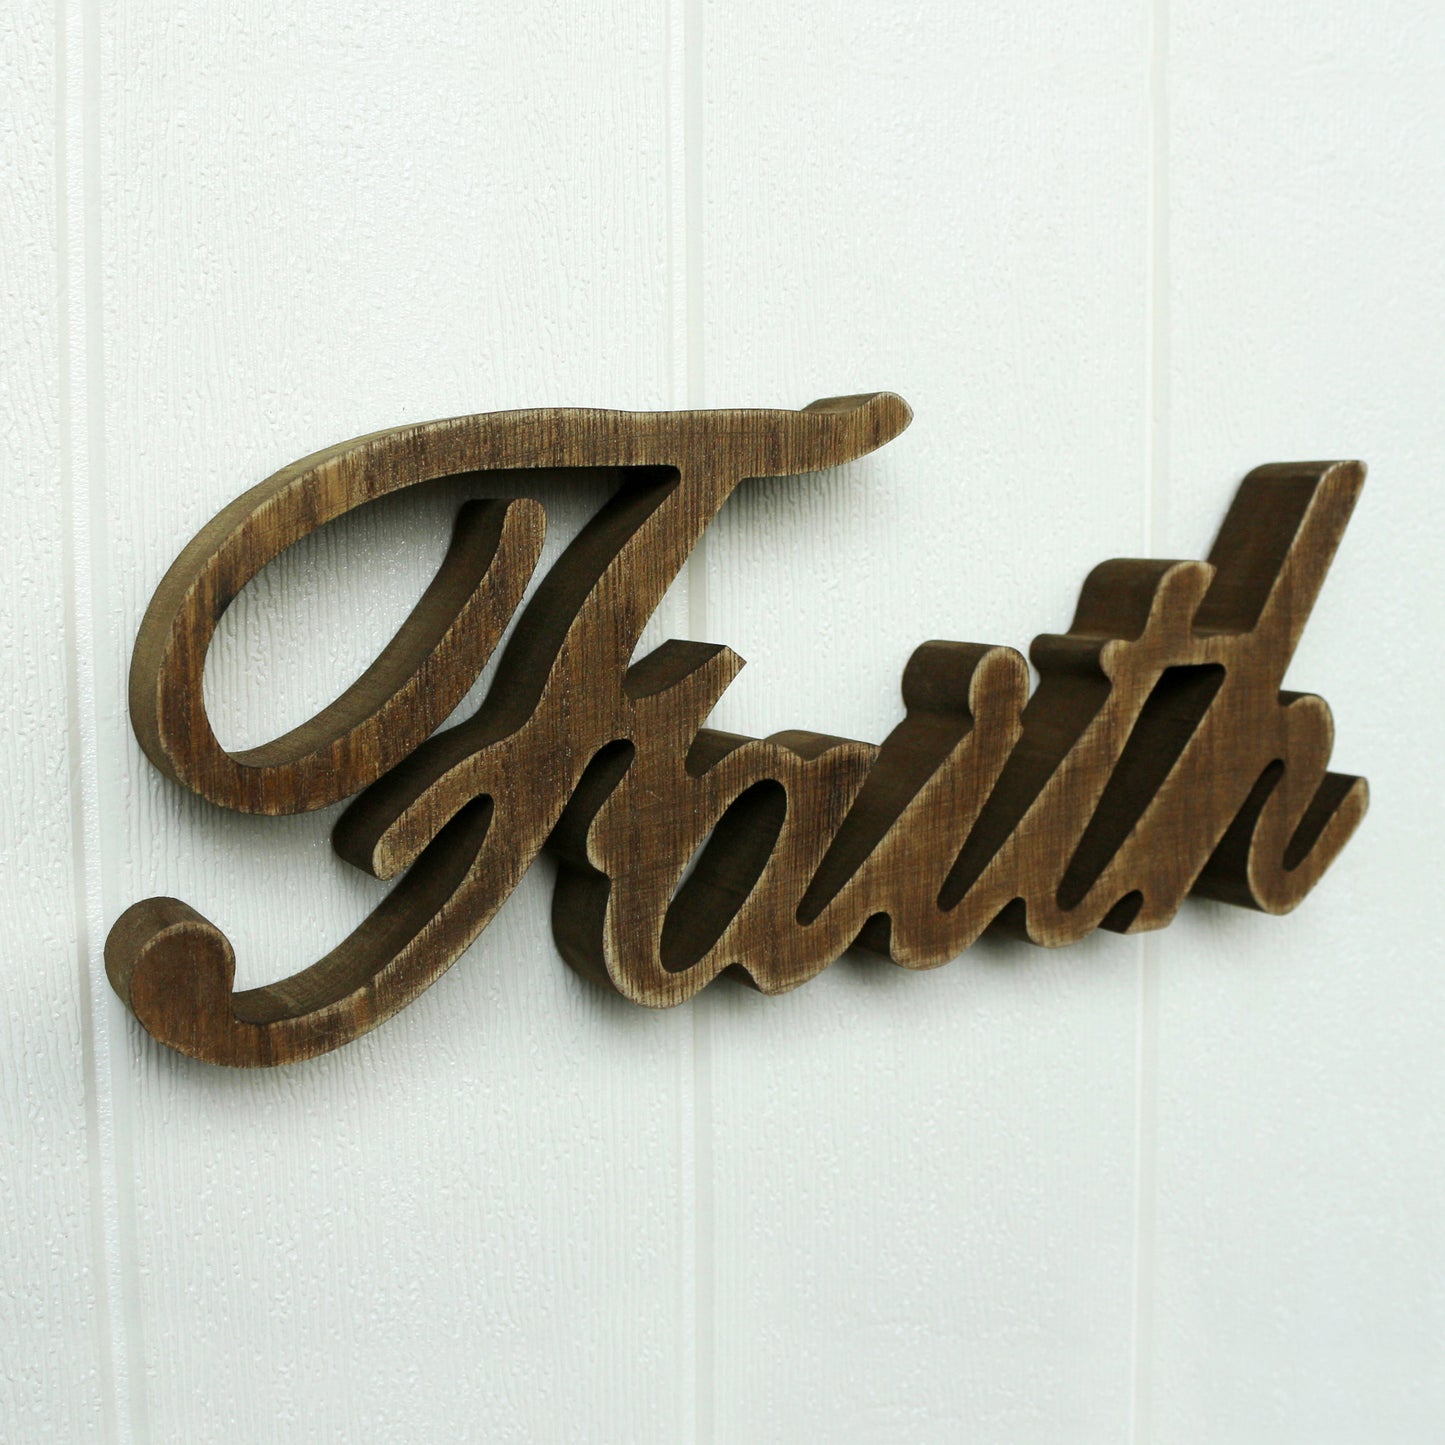 CVHOMEDECO. Rustic Vintage Distressed Wooden Words Sign Free Standing "Faith" Tabletop/Shelf/Home Wall/Office Decoration Art, 10.75 x 4.5 x 1 Inch